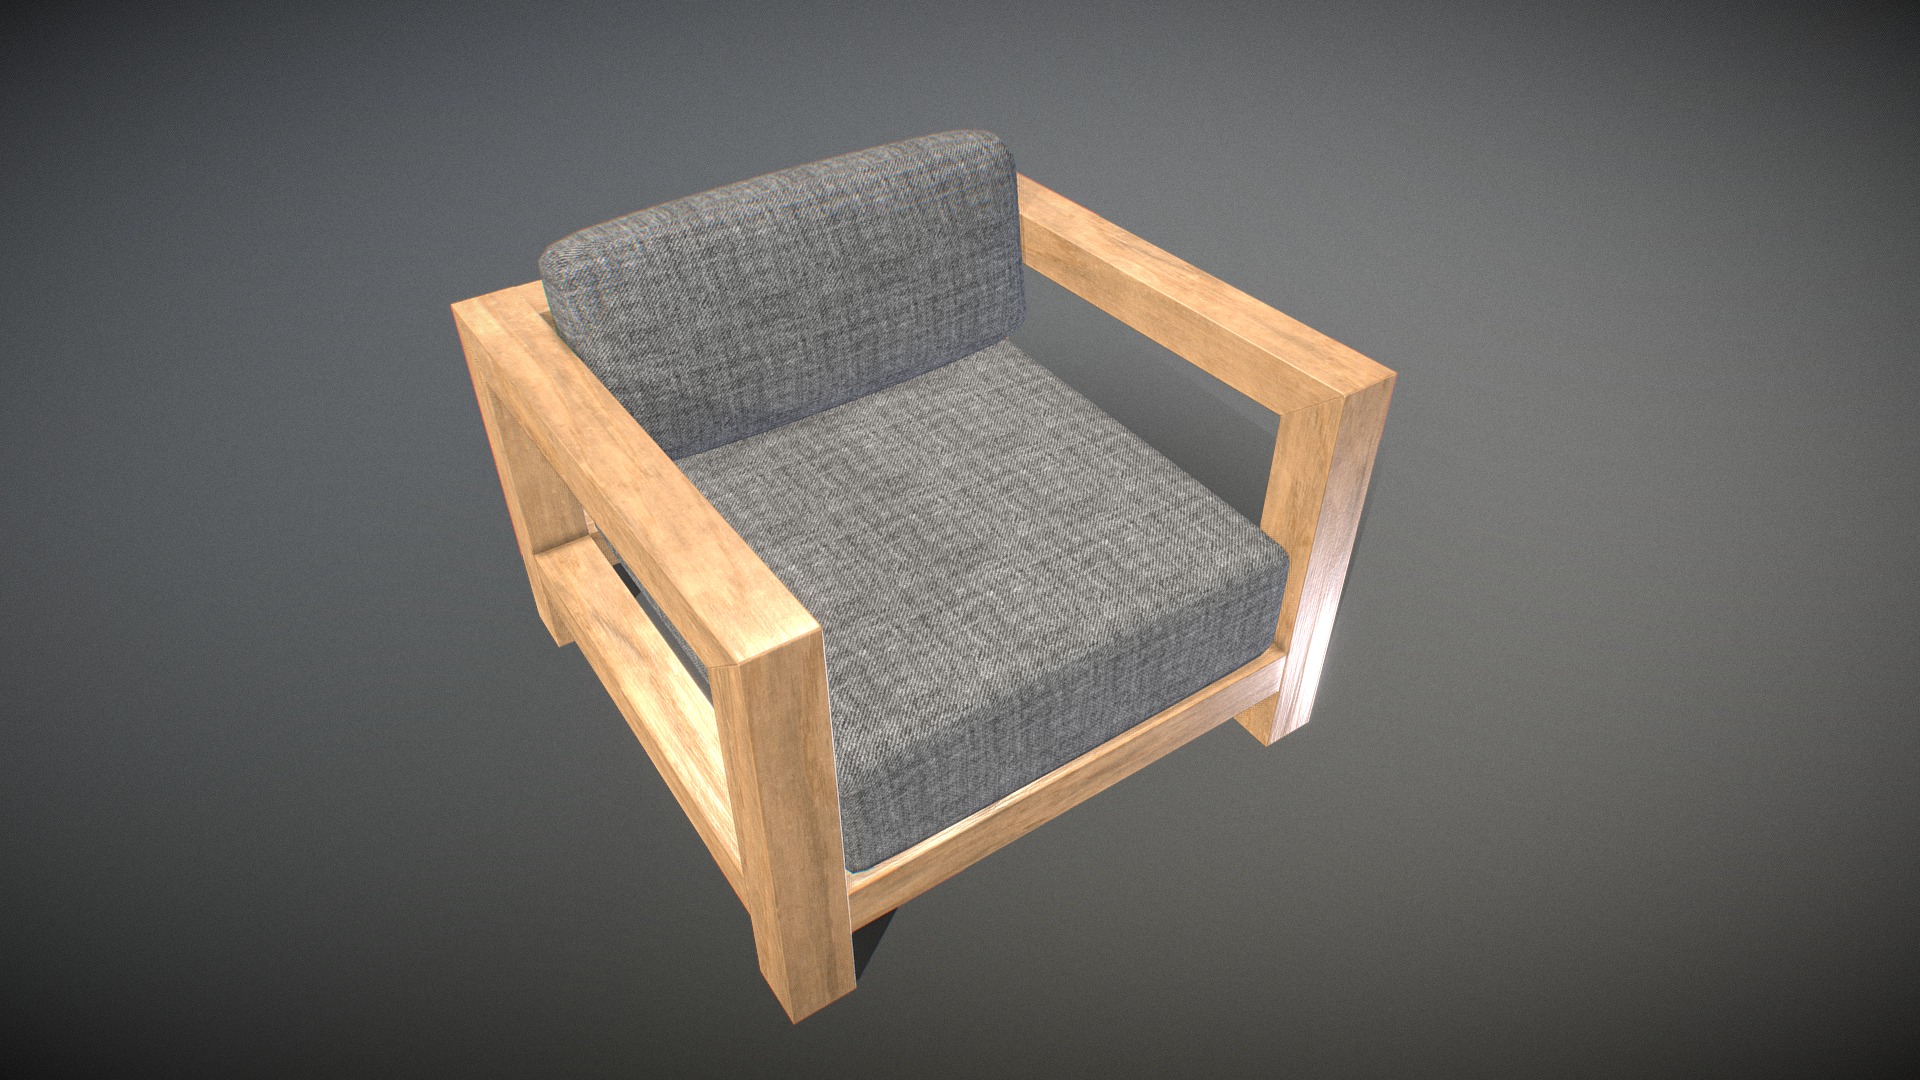 3D model Veroda Angle Sofa - This is a 3D model of the Veroda Angle Sofa. The 3D model is about a wooden chair with a cushion.